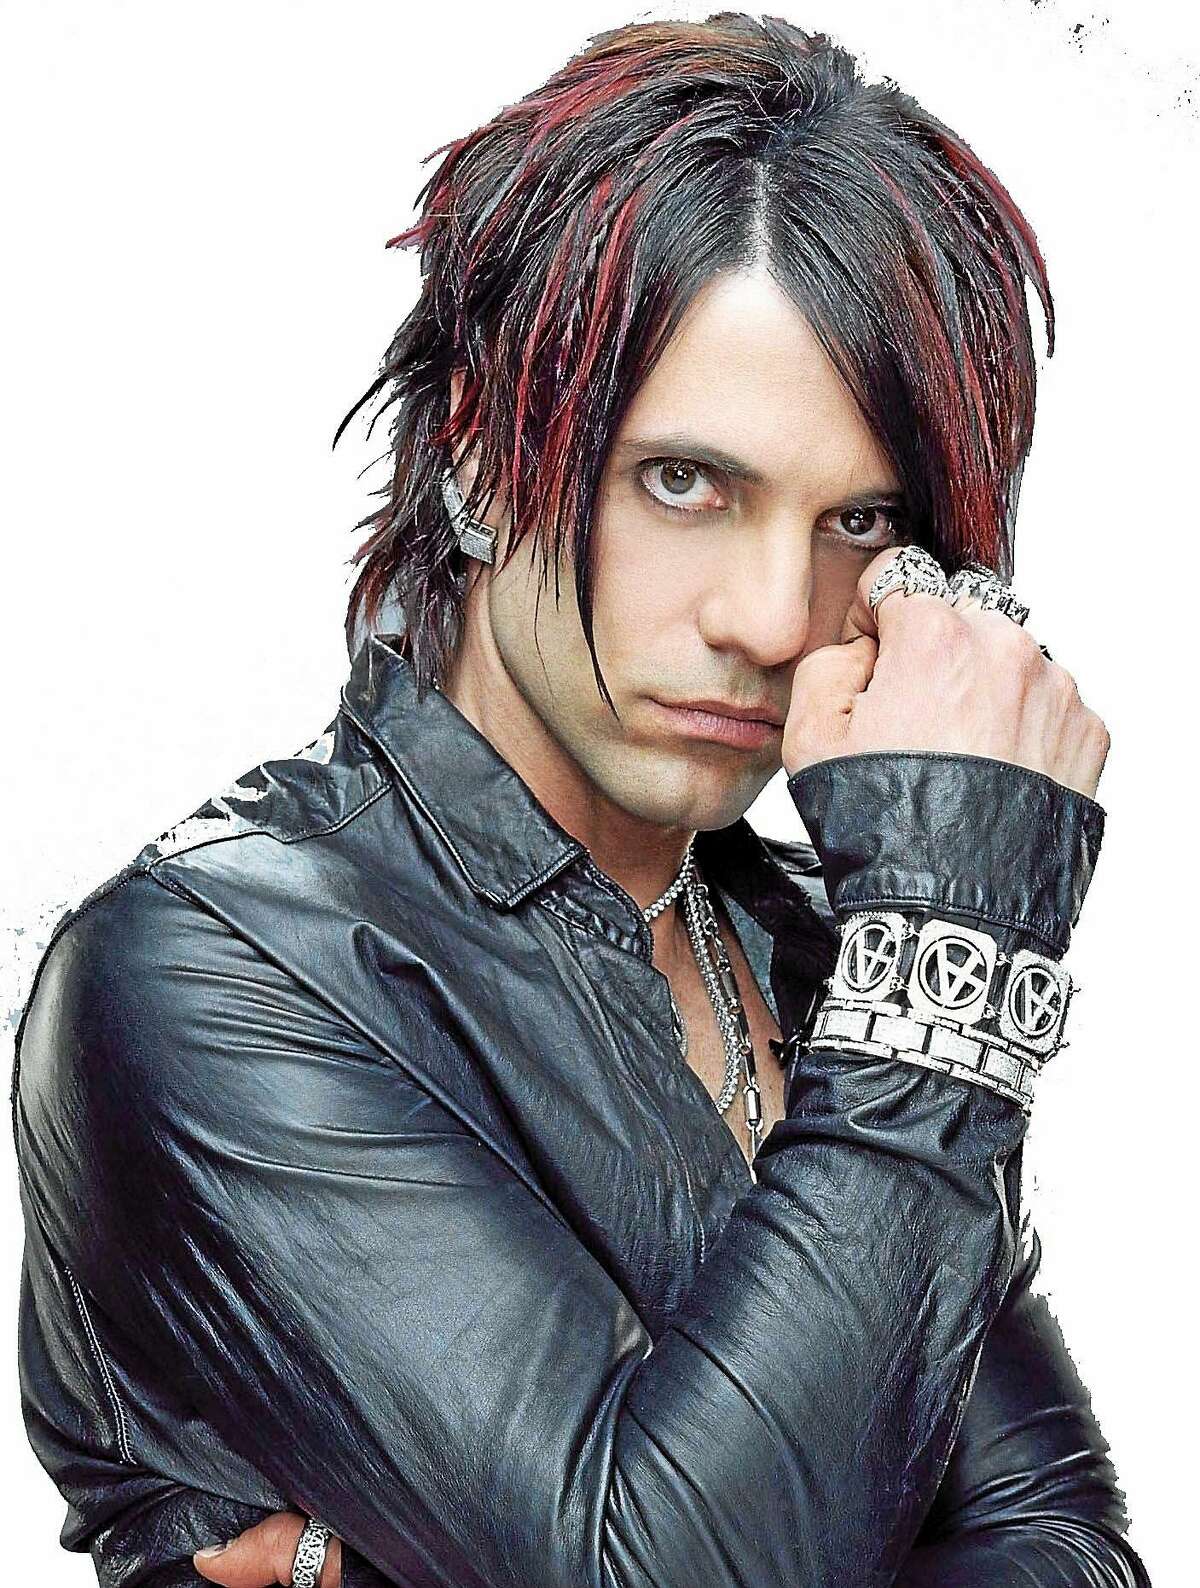 Contributed photo Magician and illusionist Criss Angel is set to return to the Foxwoods Resort & Casino, Mashantucket for six performance Jan. 15-17. For over a decade, Criss has dominated the world of magic as the biggest name on the planet. His visionary approach to the art escapes the confines of tradition and has given birth to a new breed of modern mysticism. His acclaimed series ìMindfreakî on the A&E network is the most successful magic shows ever. It continues to be viewed regularly by more than 100 million viewers per season, over 90 countries. To purchase tickets or for more information on these upcoming magic shows coming to Foxwoods, call the box office at 1-800-200-2882 or visit www.foxwoods.com